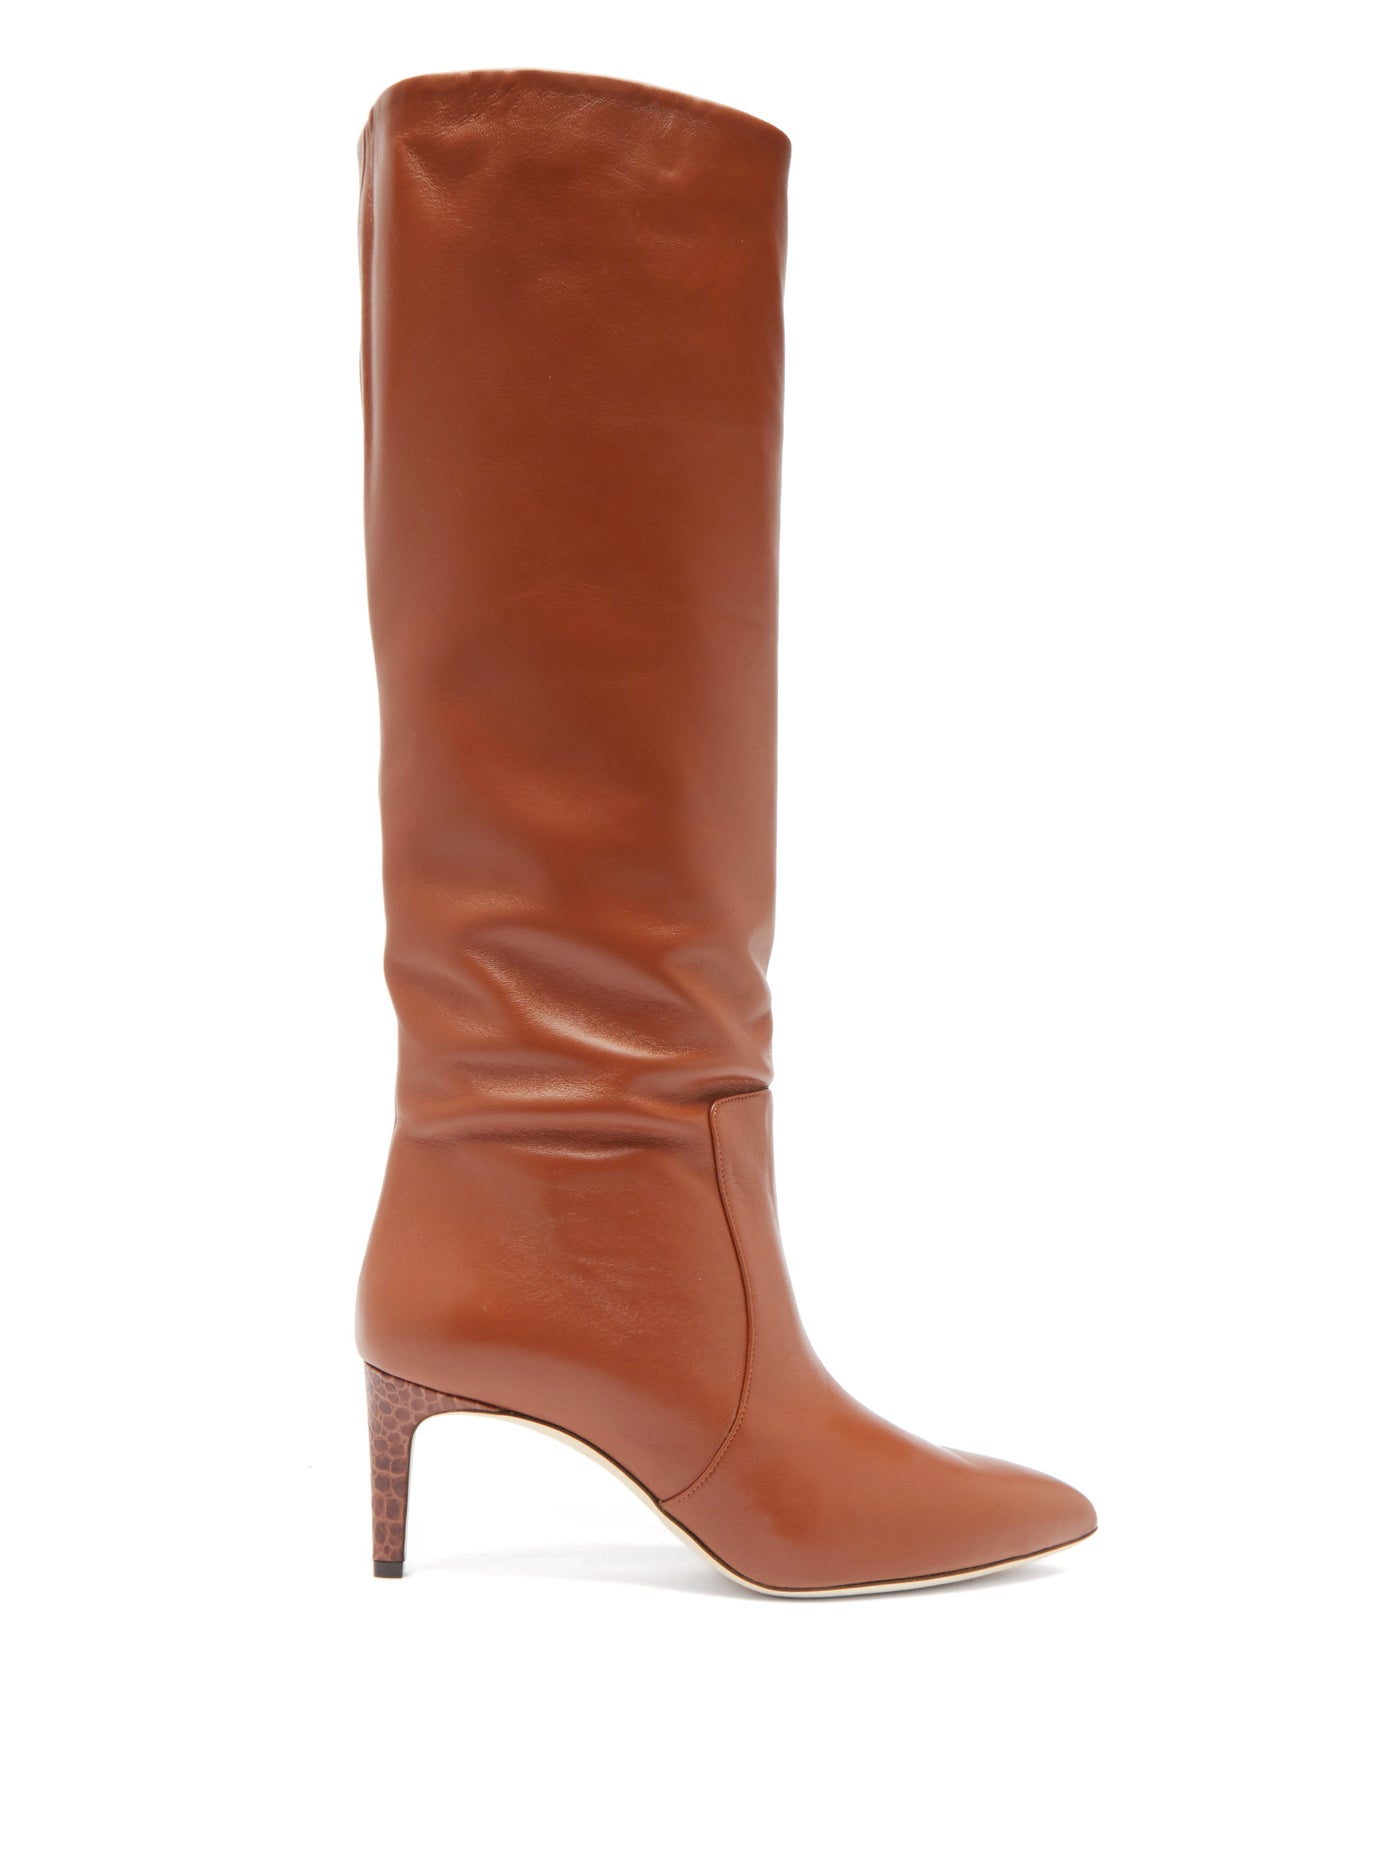 Paris Texas - Knee-High Leather Boots | ABOUT ICONS